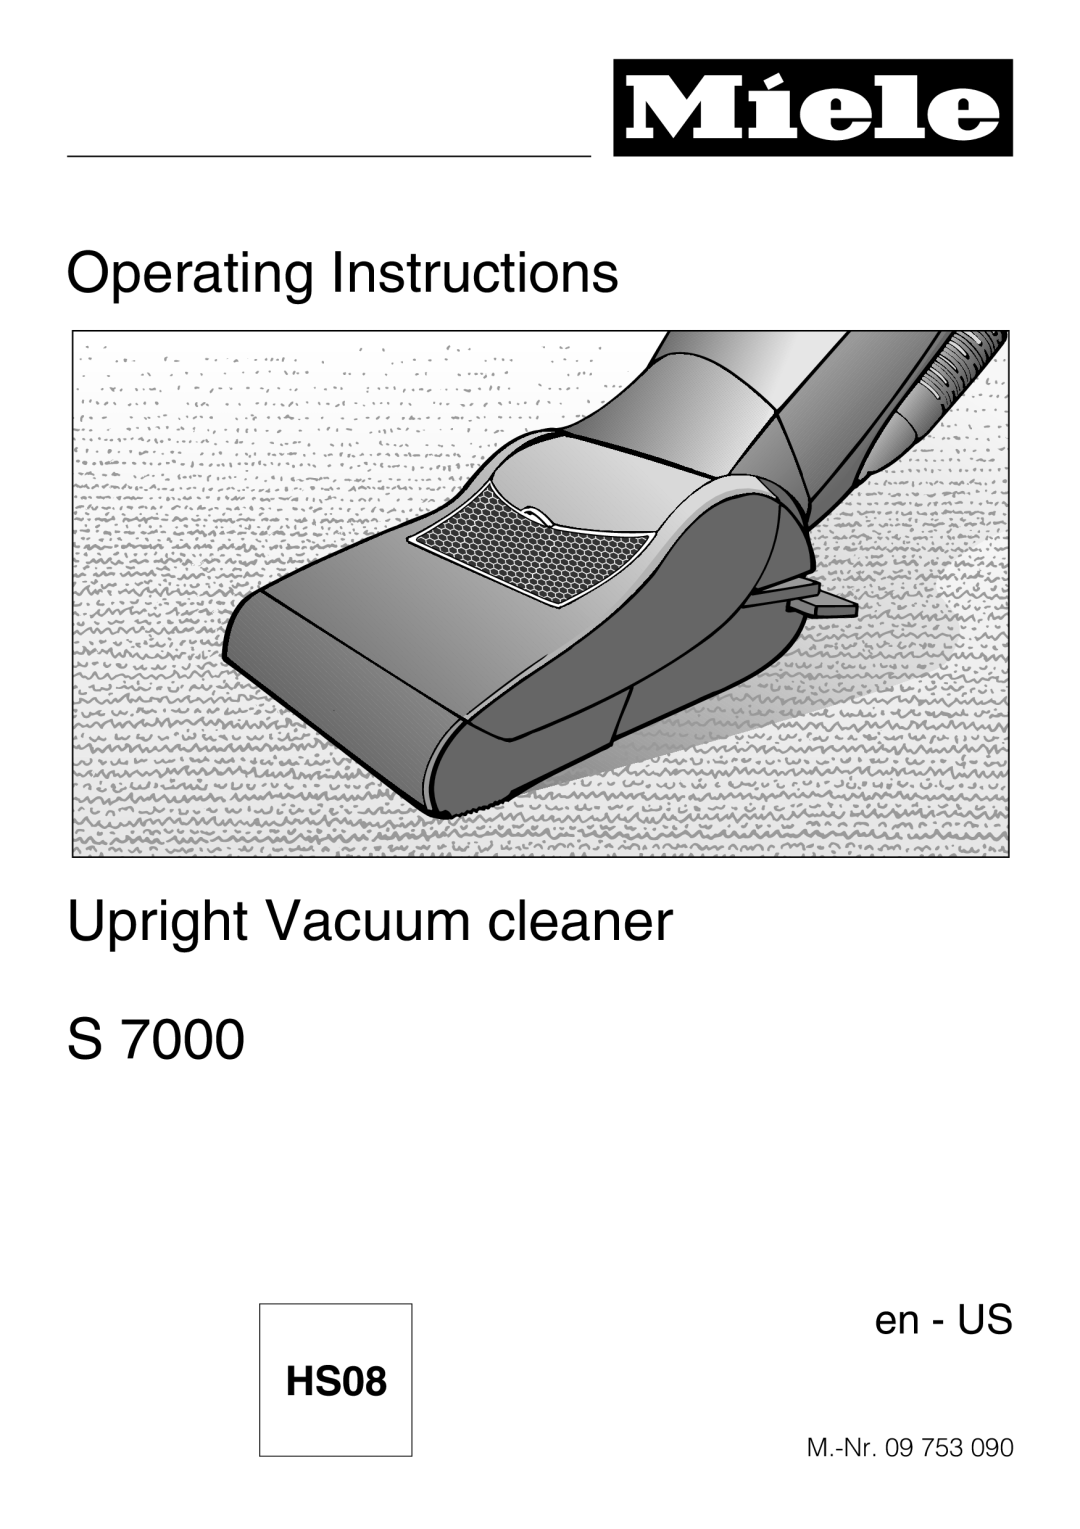 Miele M-NR09753 090 operating instructions Operating Instructions Upright Vacuum cleaner S, HS08, en - US 